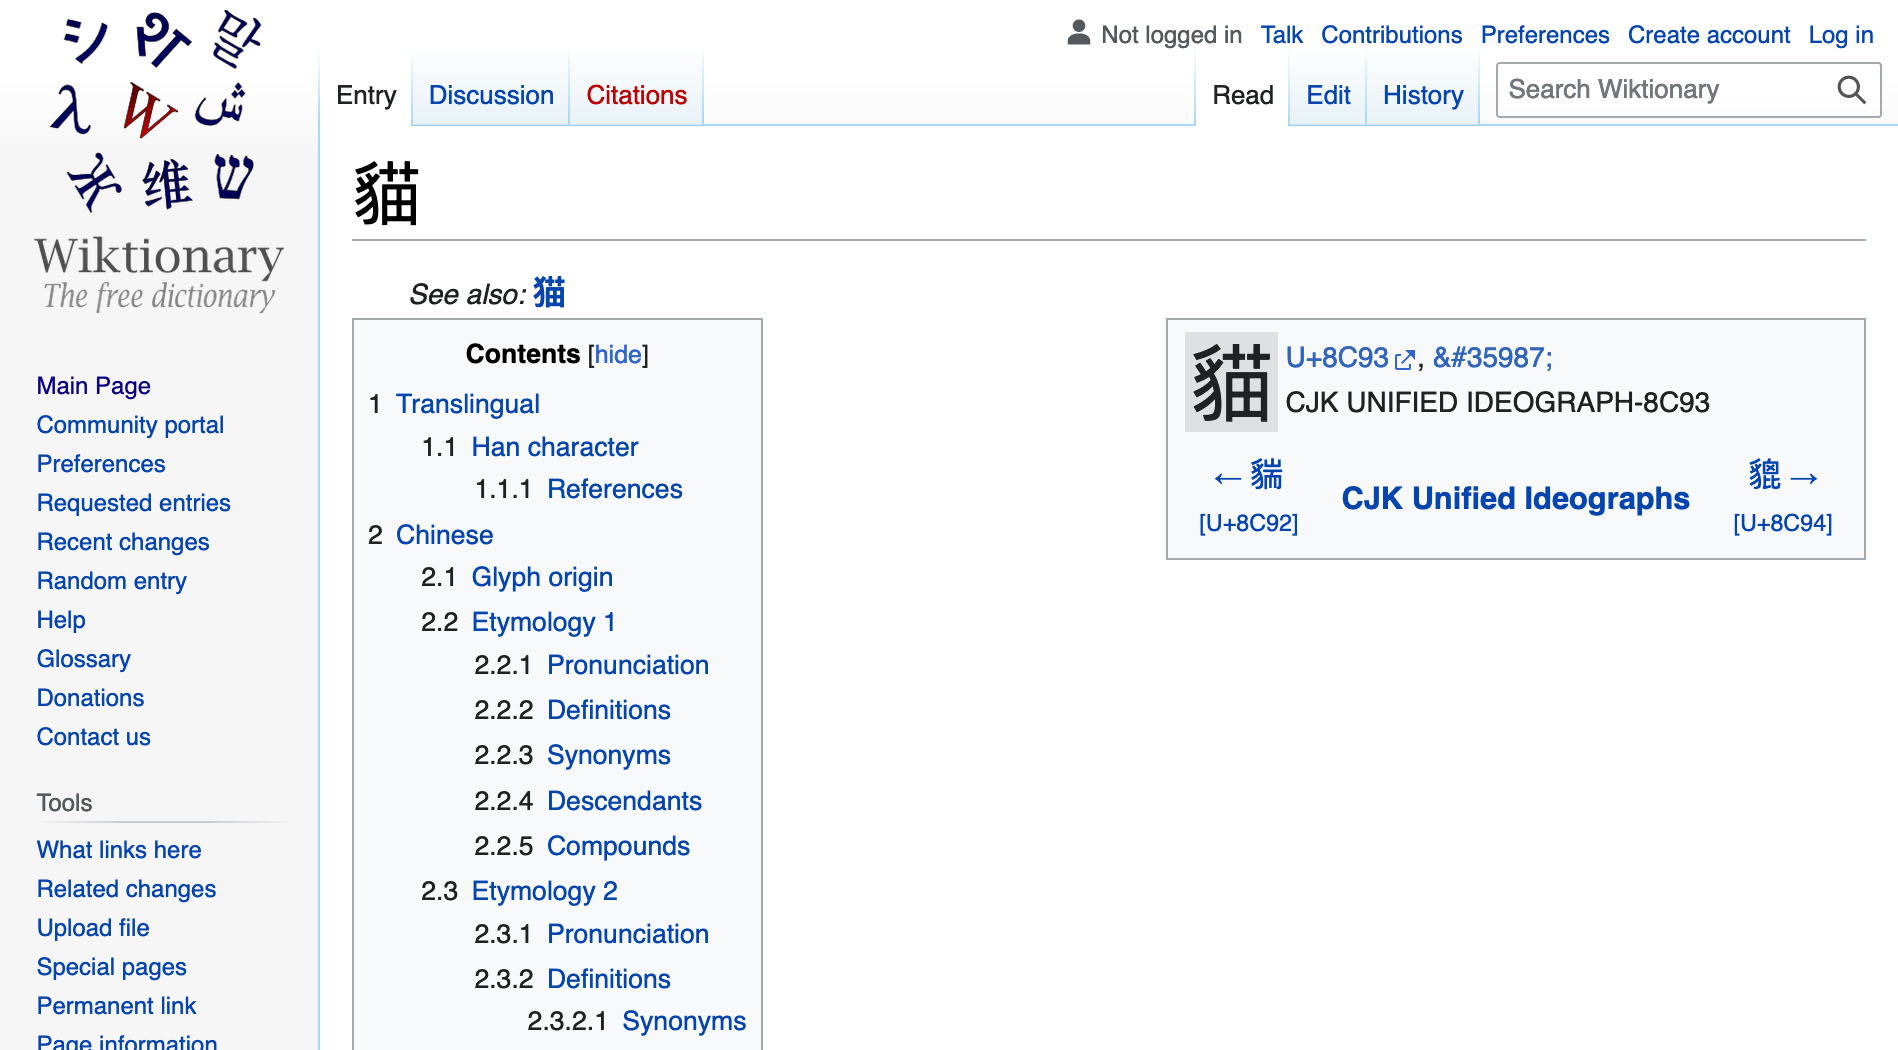 A screenshot from the Wiktionary website showing the entry results for the Chinese character for cat